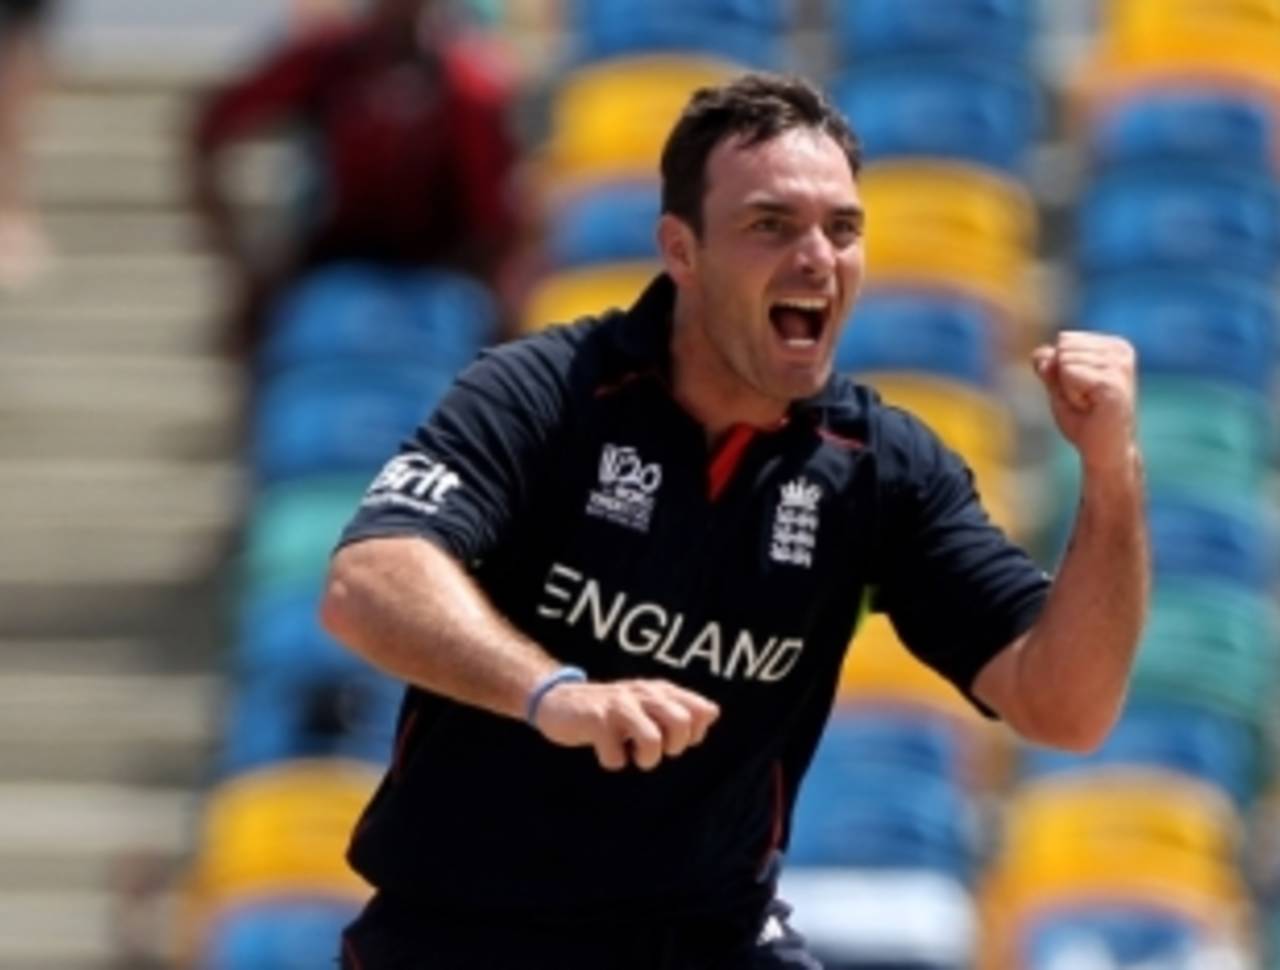 Michael Yardy celebrates the second of his two wickets against Pakistan, England v Pakistan, Group E, World Twenty20, Barbados, May 6, 2010

